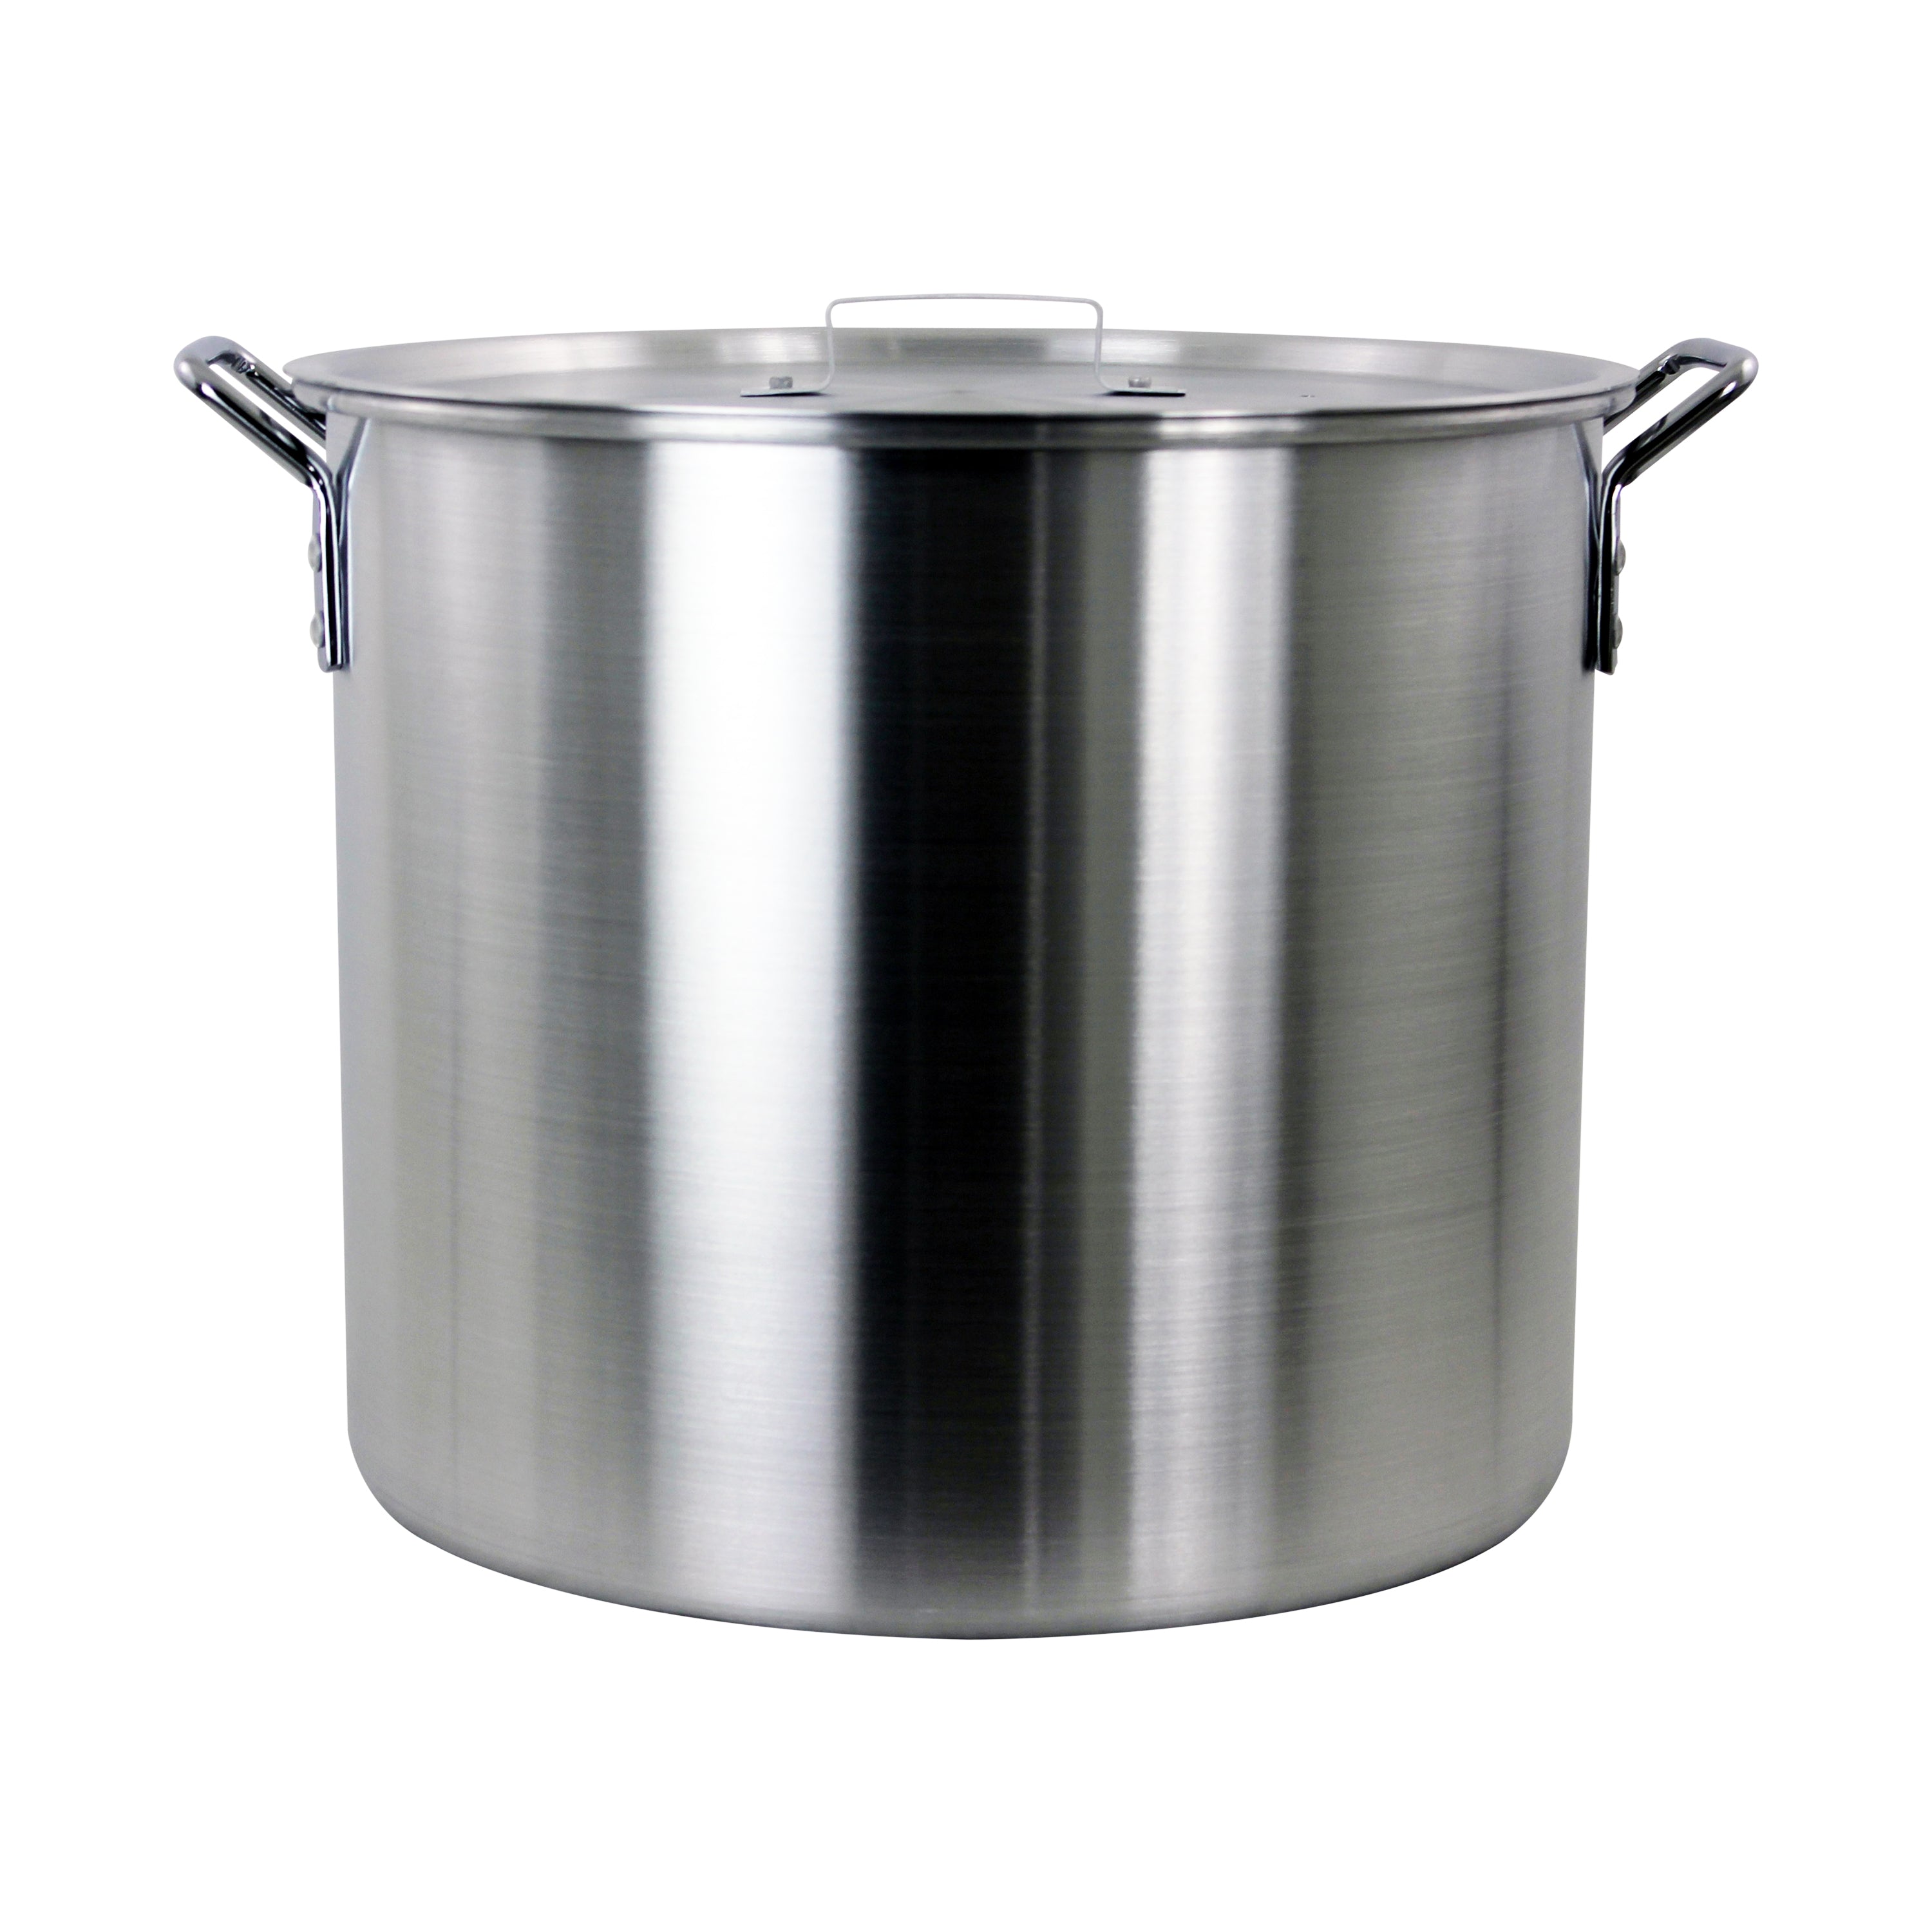 Chard ASP30, Aluminum Perforated Safety Hanger, 30 Quart Stock Pot and  Strainer Basket, 1, Stainless Steel